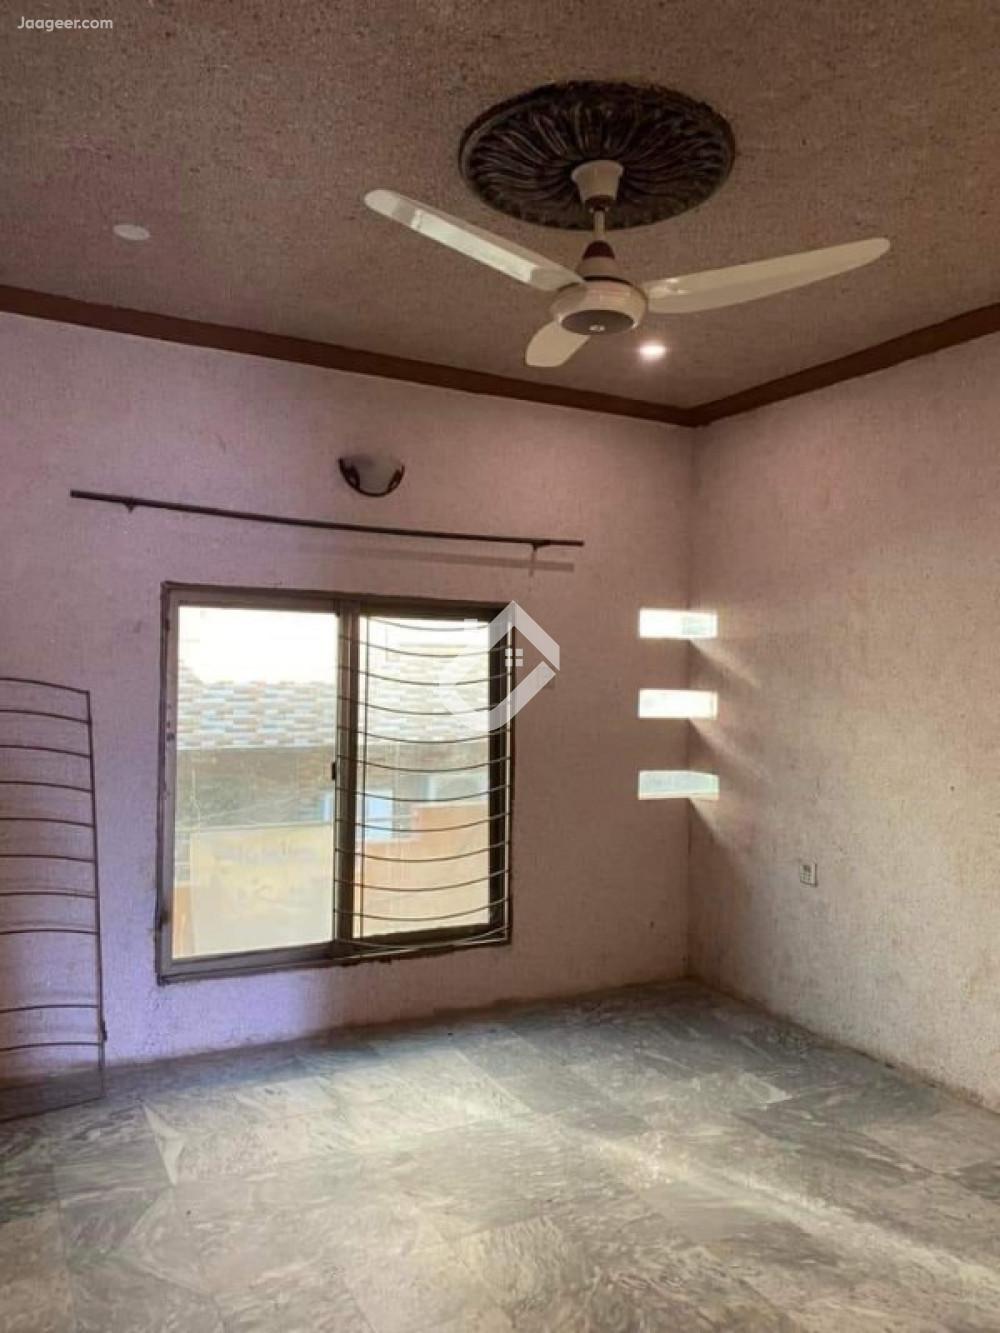 View  3 Marla Double Storey House For Sale In Old Satellite Town Block-C in Old Satellite Town, Sargodha